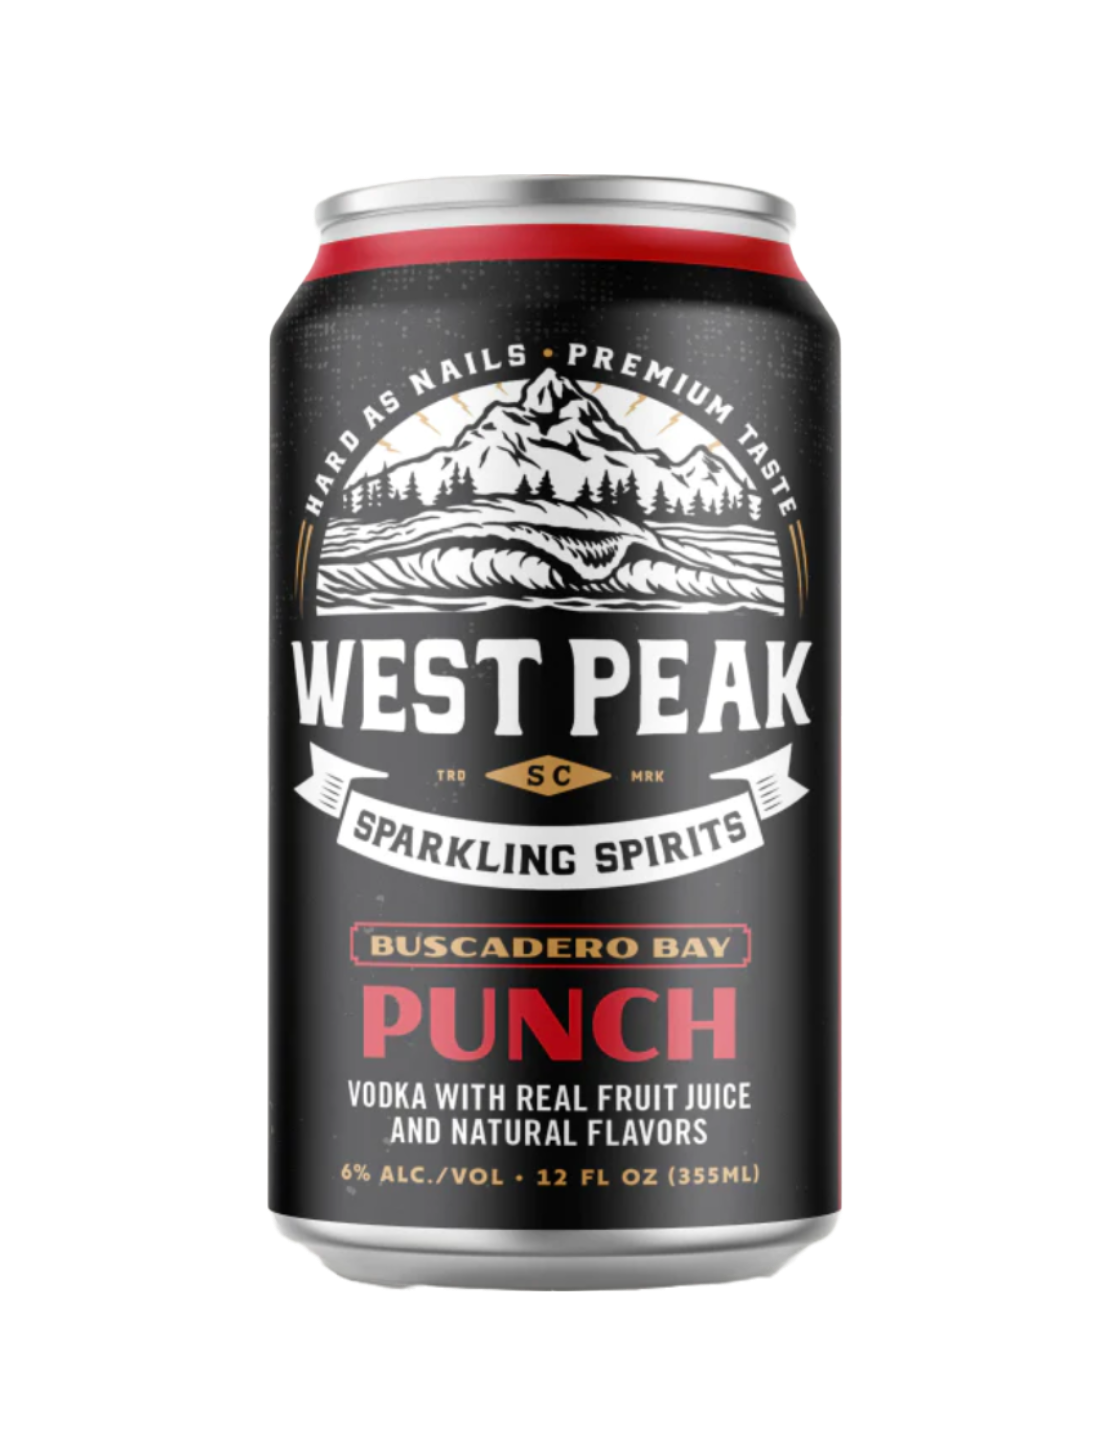 A black can of West Peak Sparkling Spirits Buscadero Bay Punch in front of a plain white background